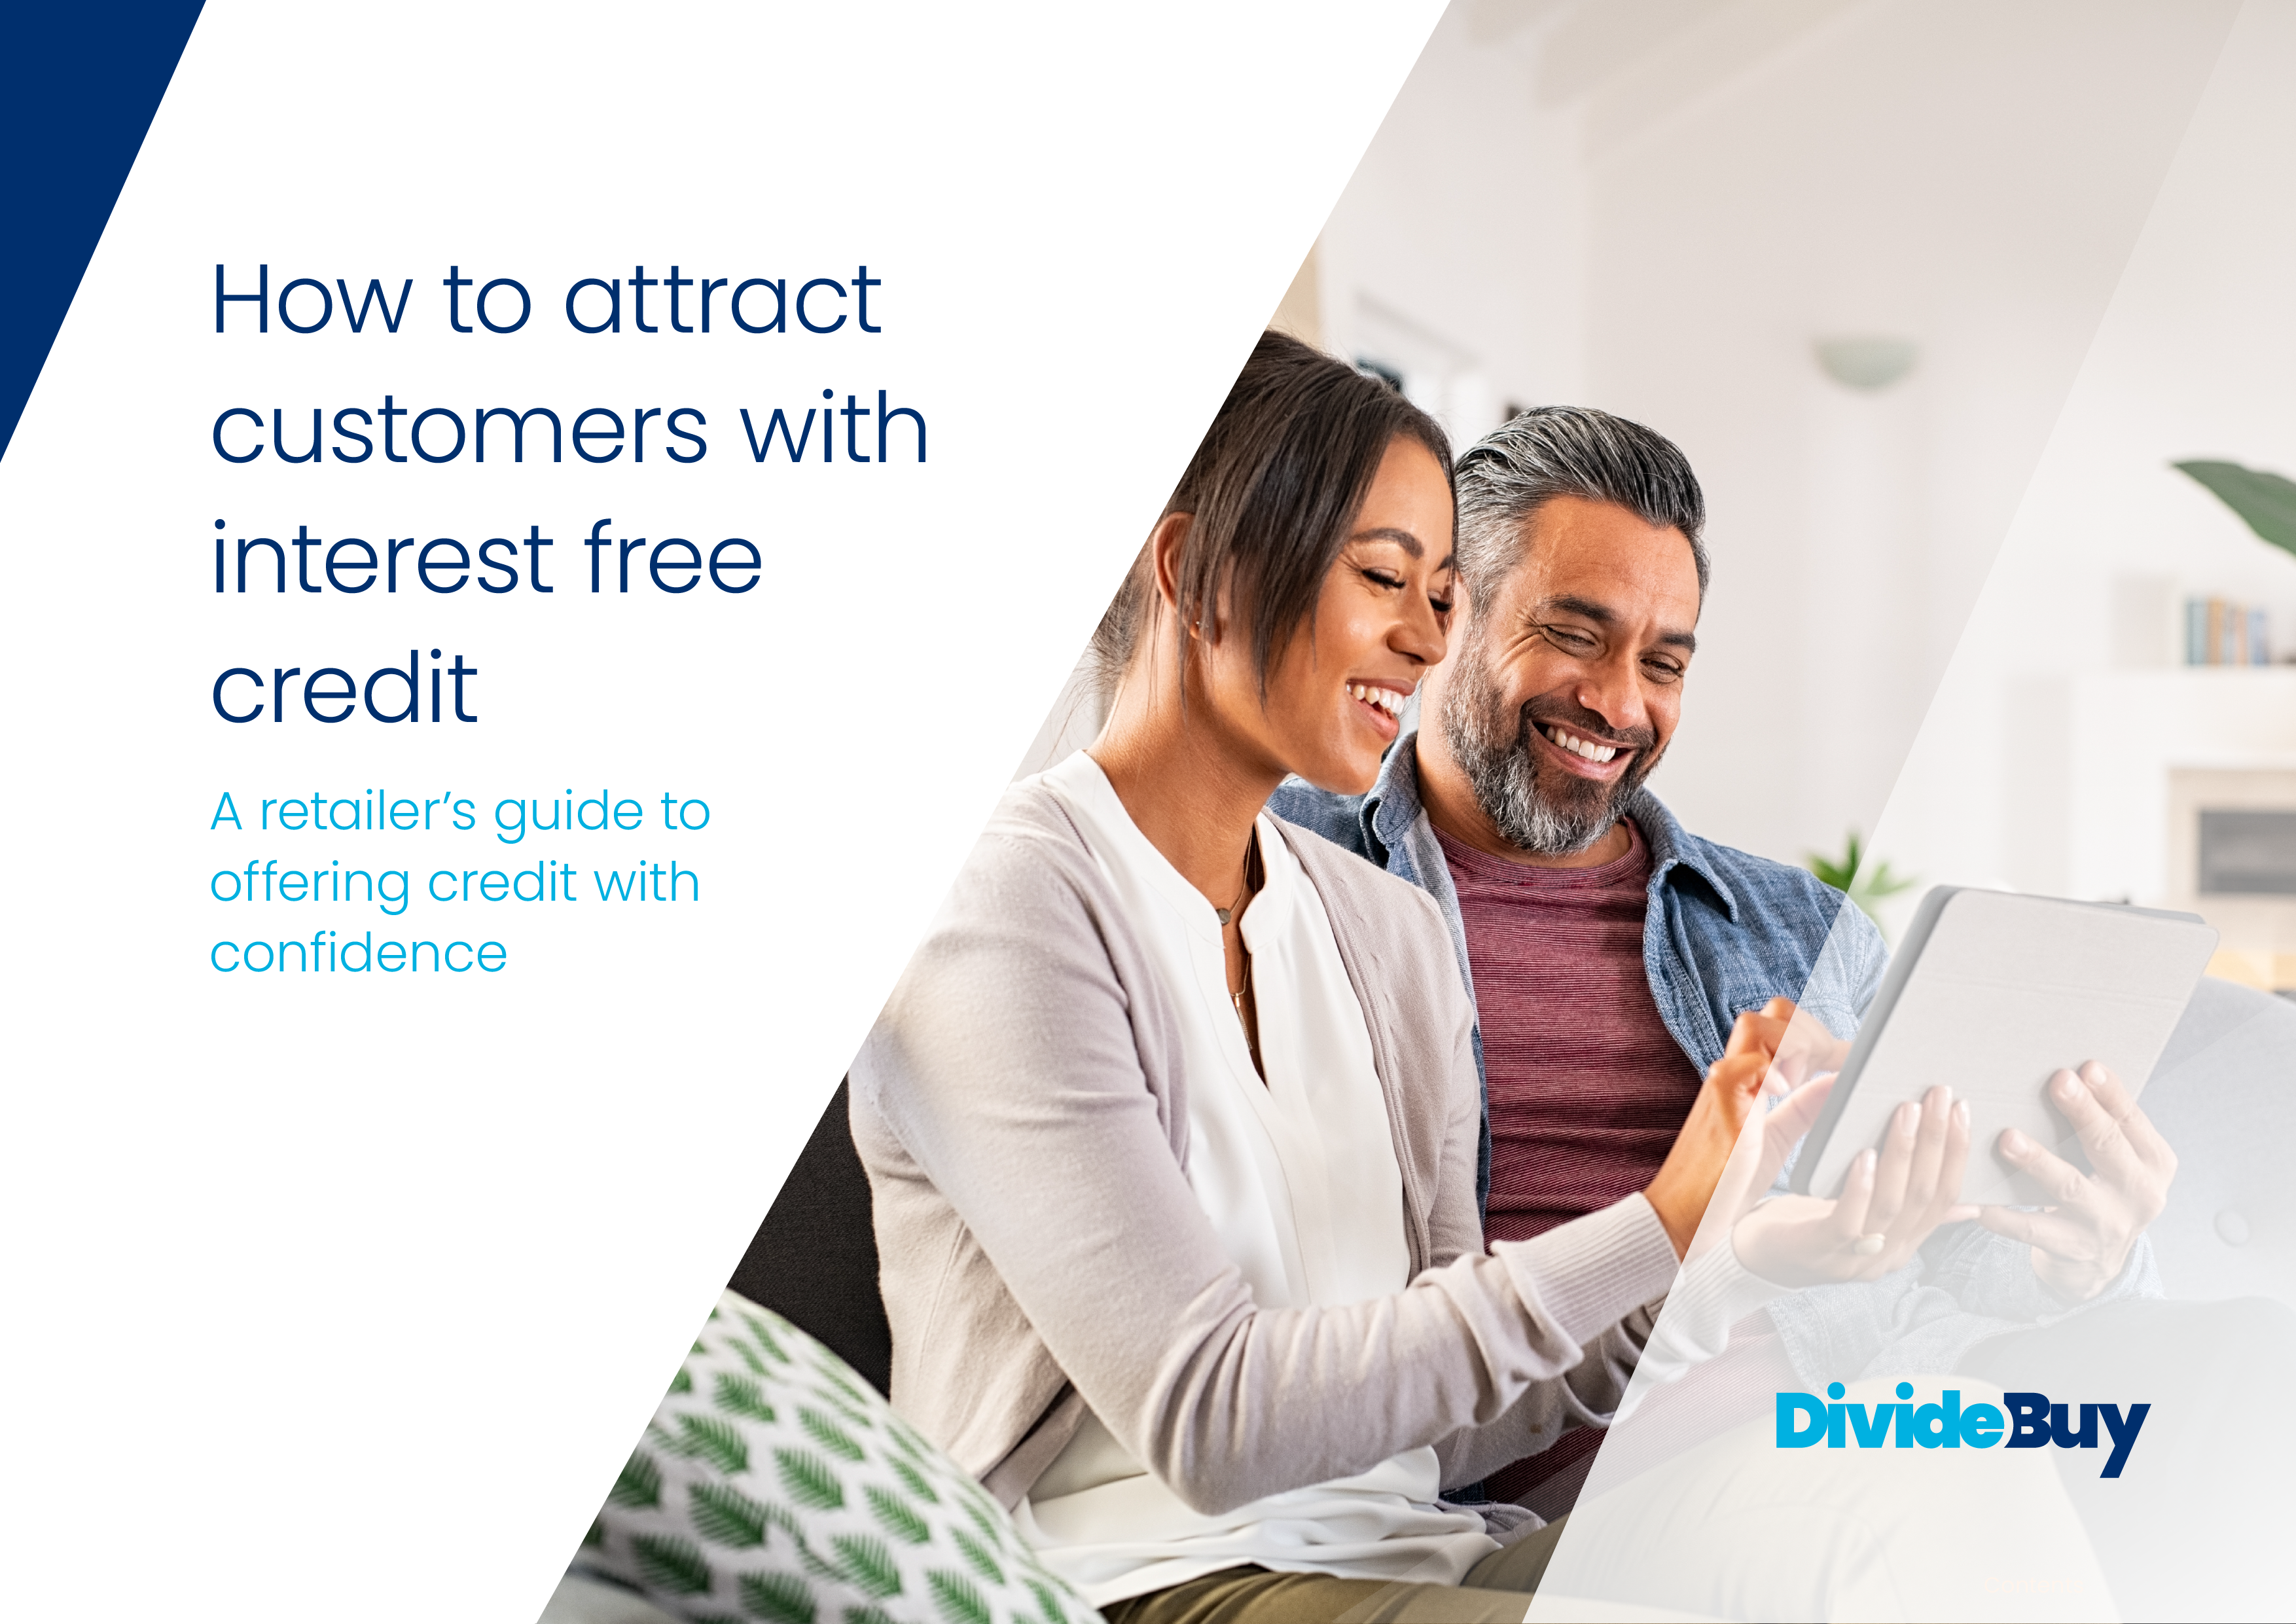 How to attract customers with interest free credit